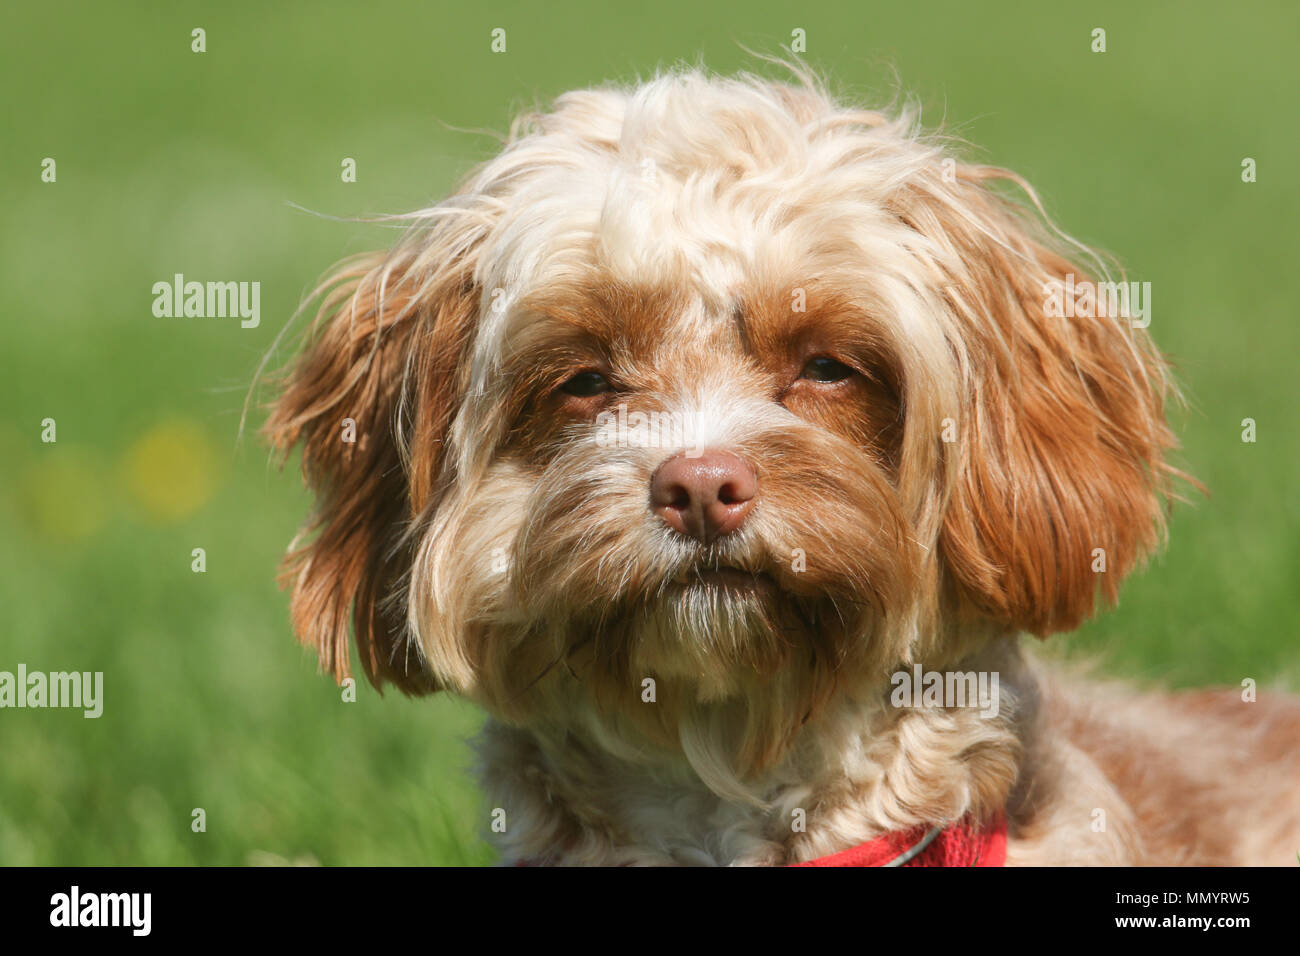 King cavalier mix stock photography images - Alamy